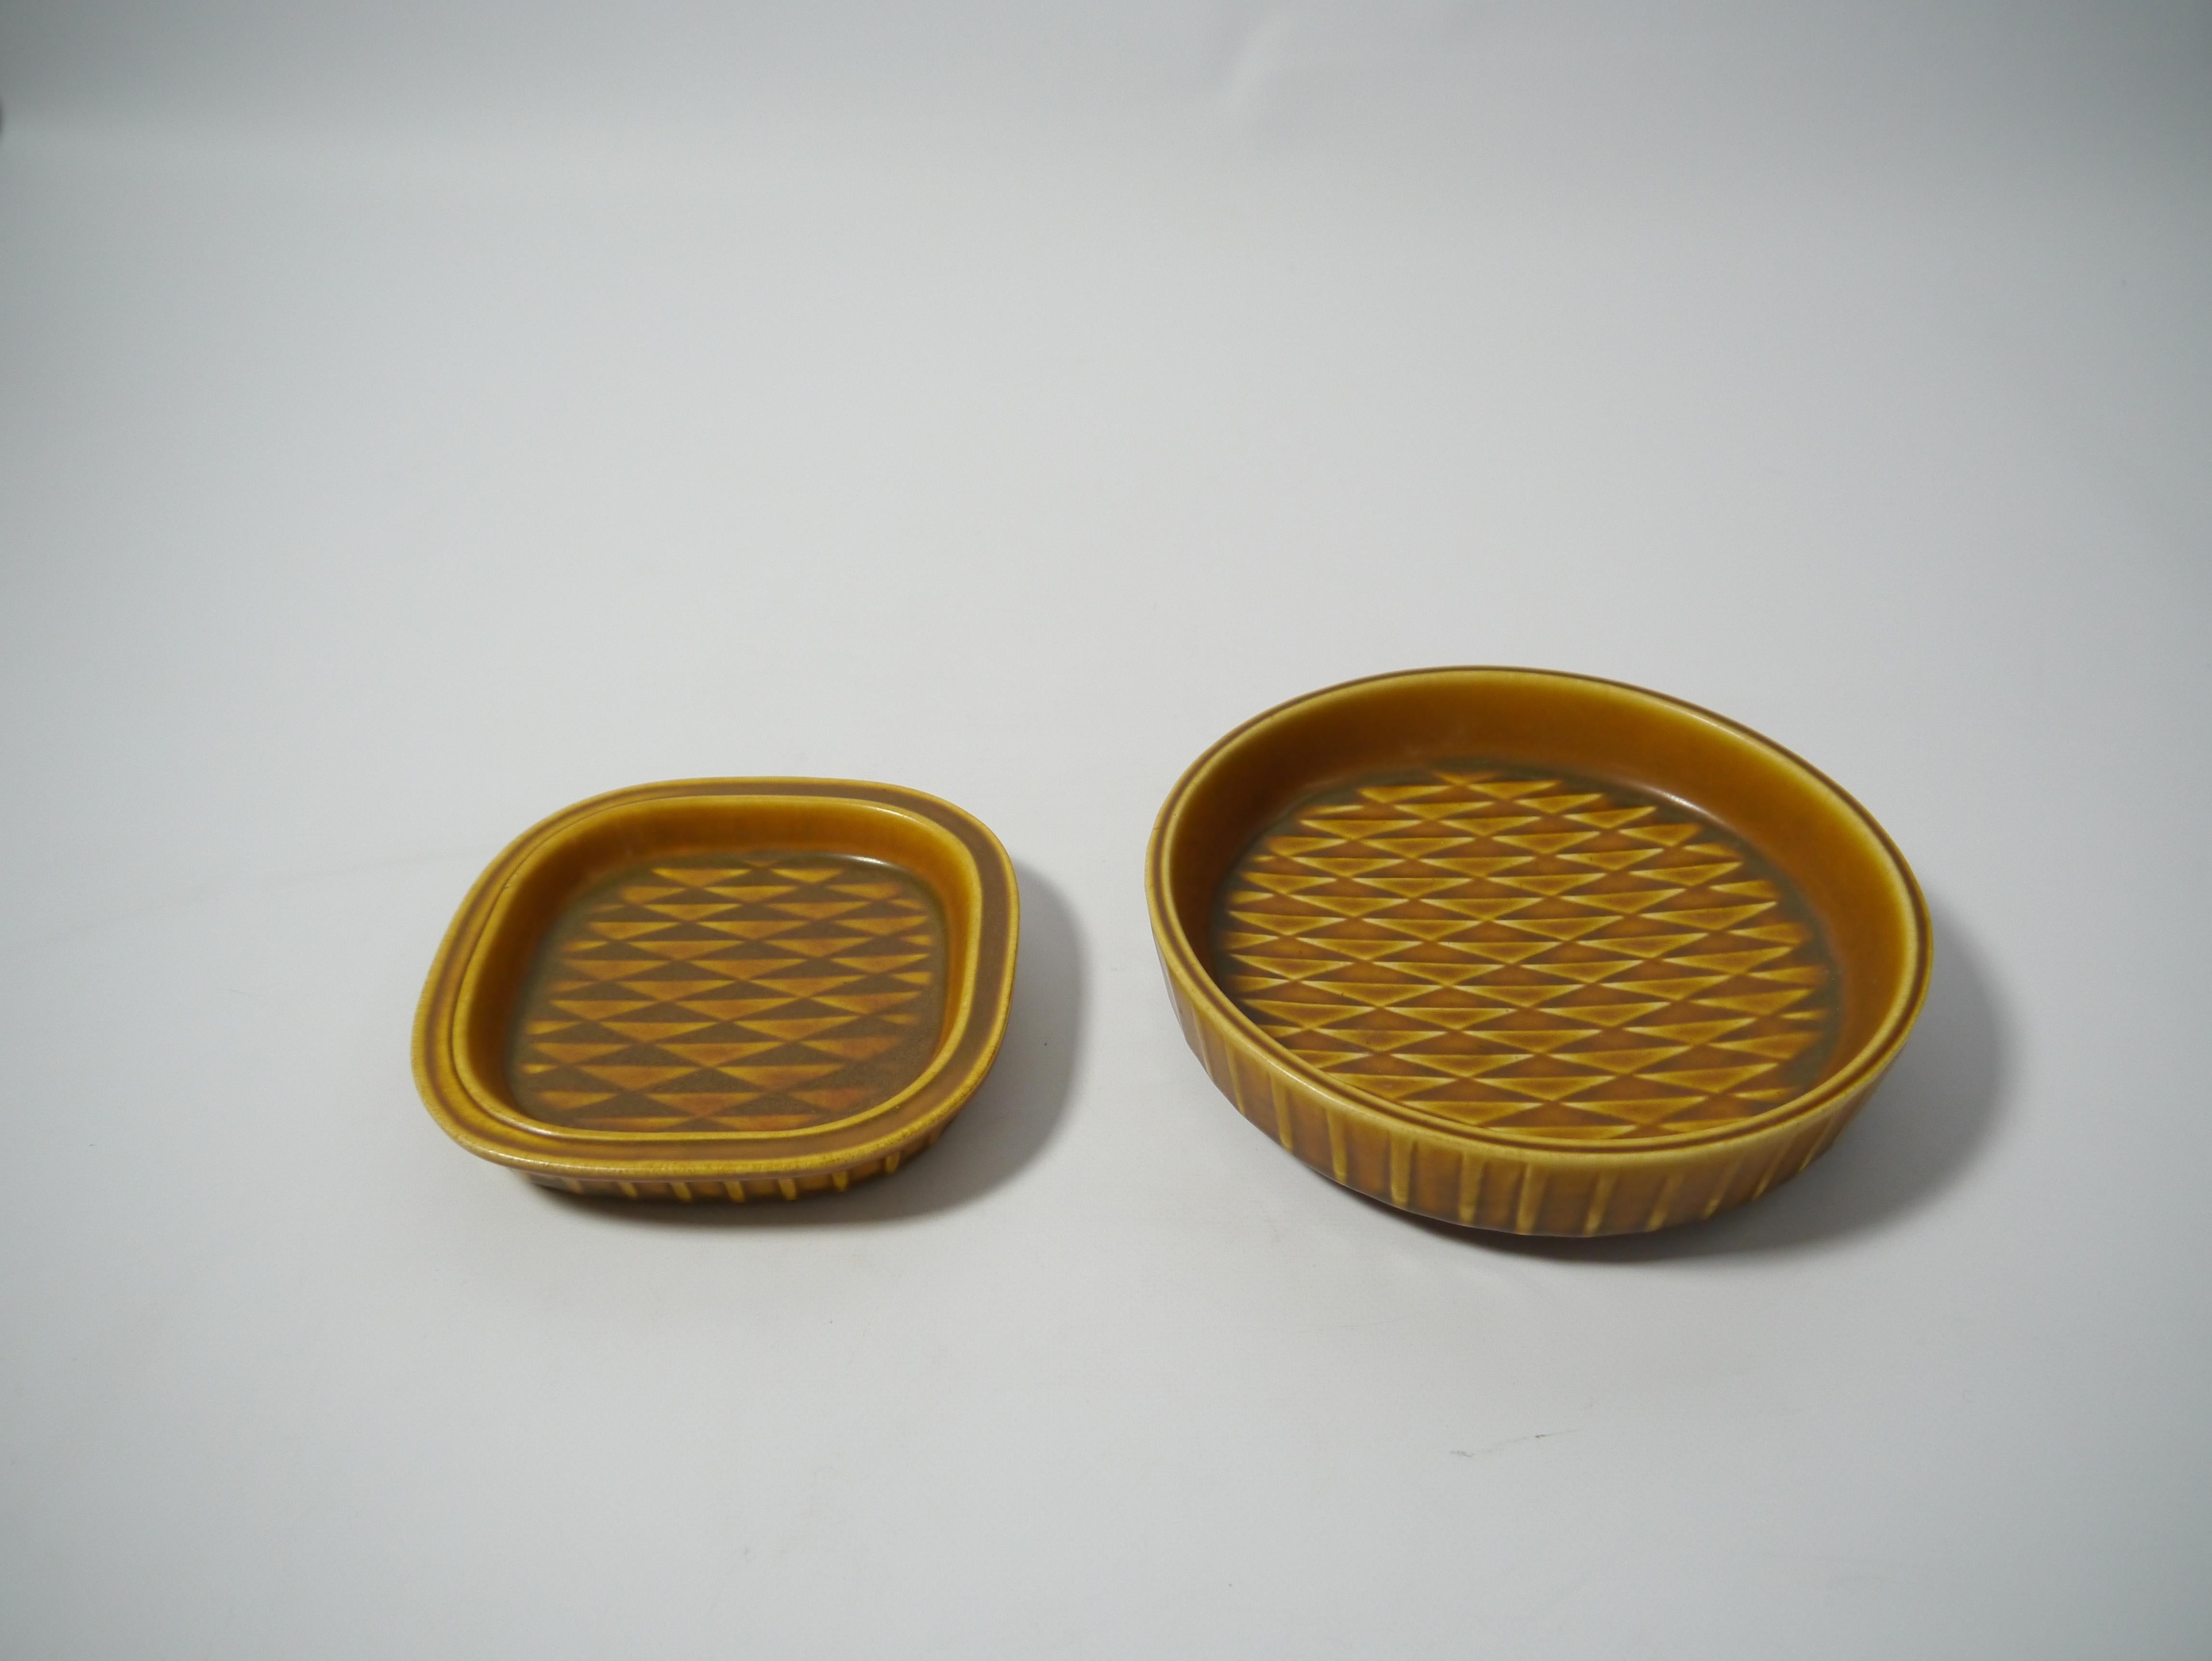 Scandinavian Modern Two Mustard Yellow Ceramic Plates by Gunnar Nylund for Rörstrand, Sweden, 1950s For Sale